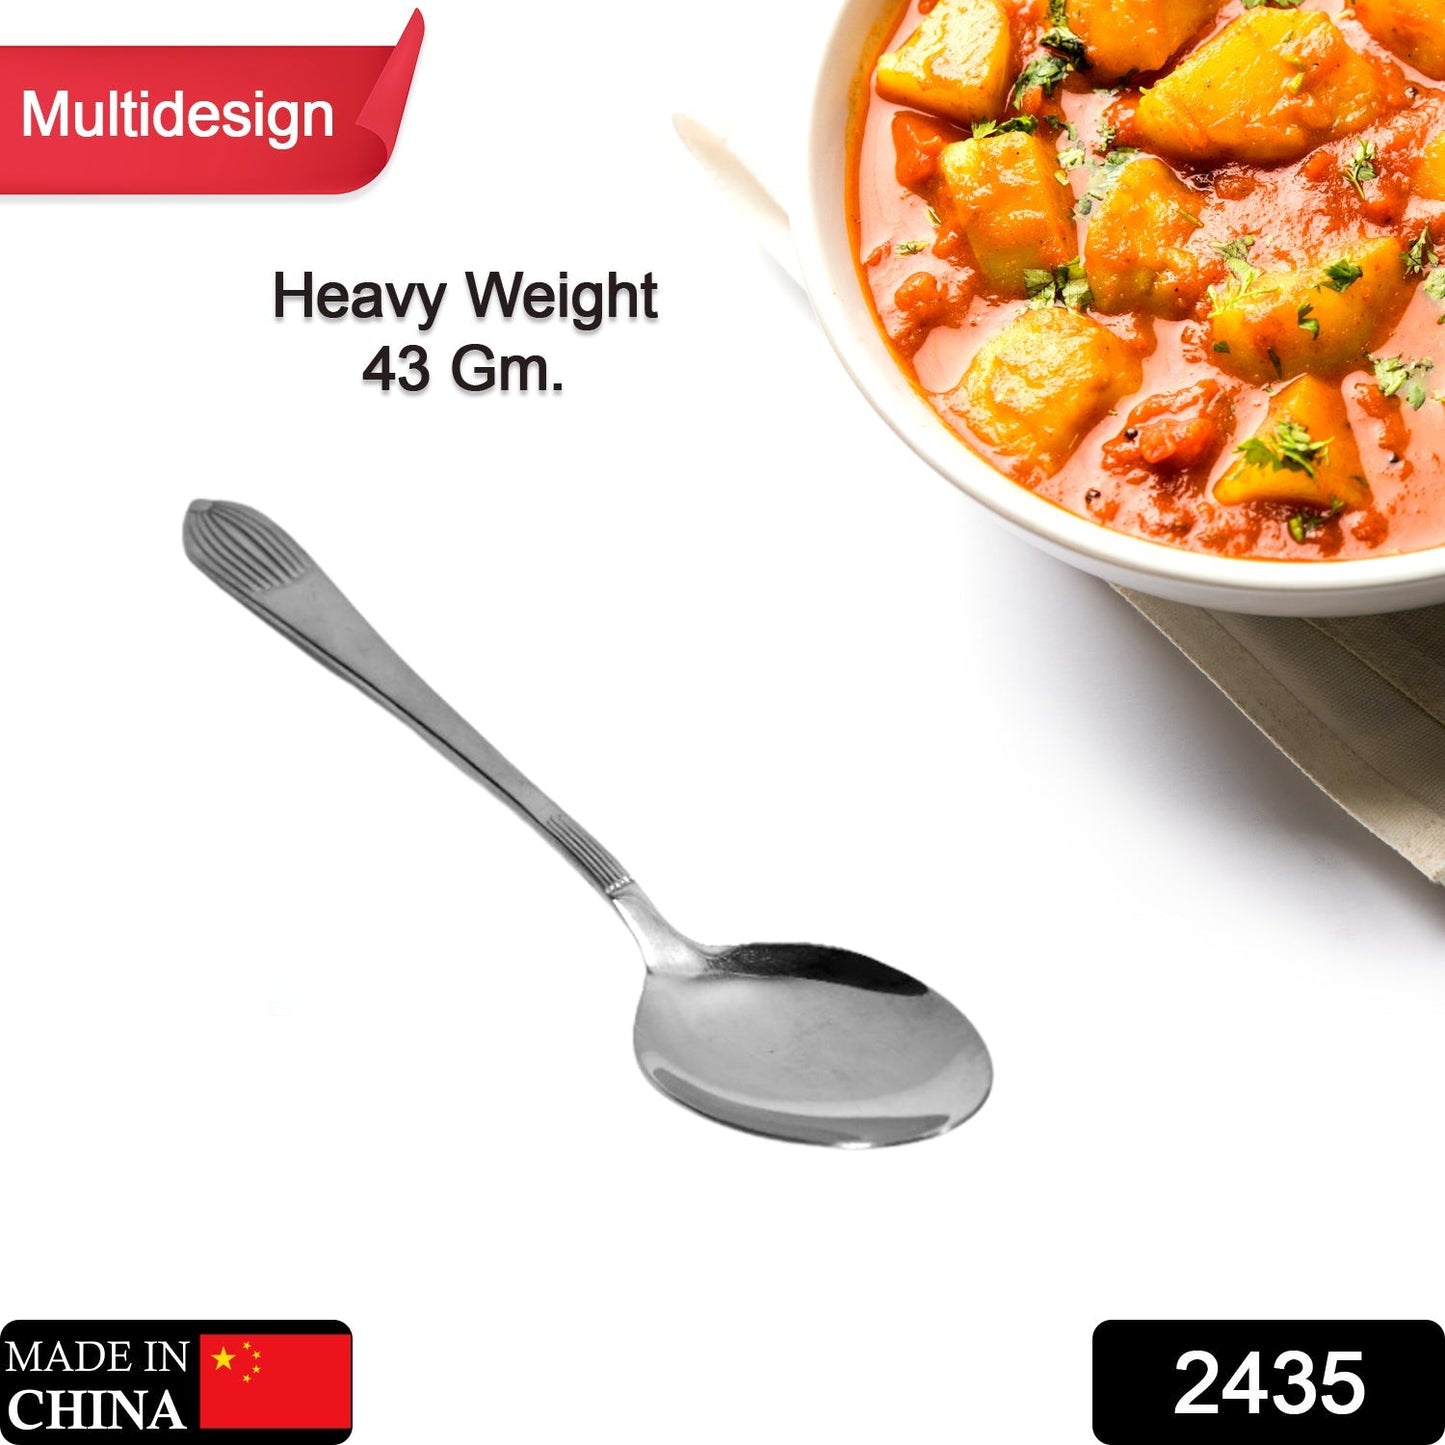 2435 Stainless Steel Spoon 1pc Spoon. Spoon for Coffee, Tea, Sugar, & Spices. DukanDaily